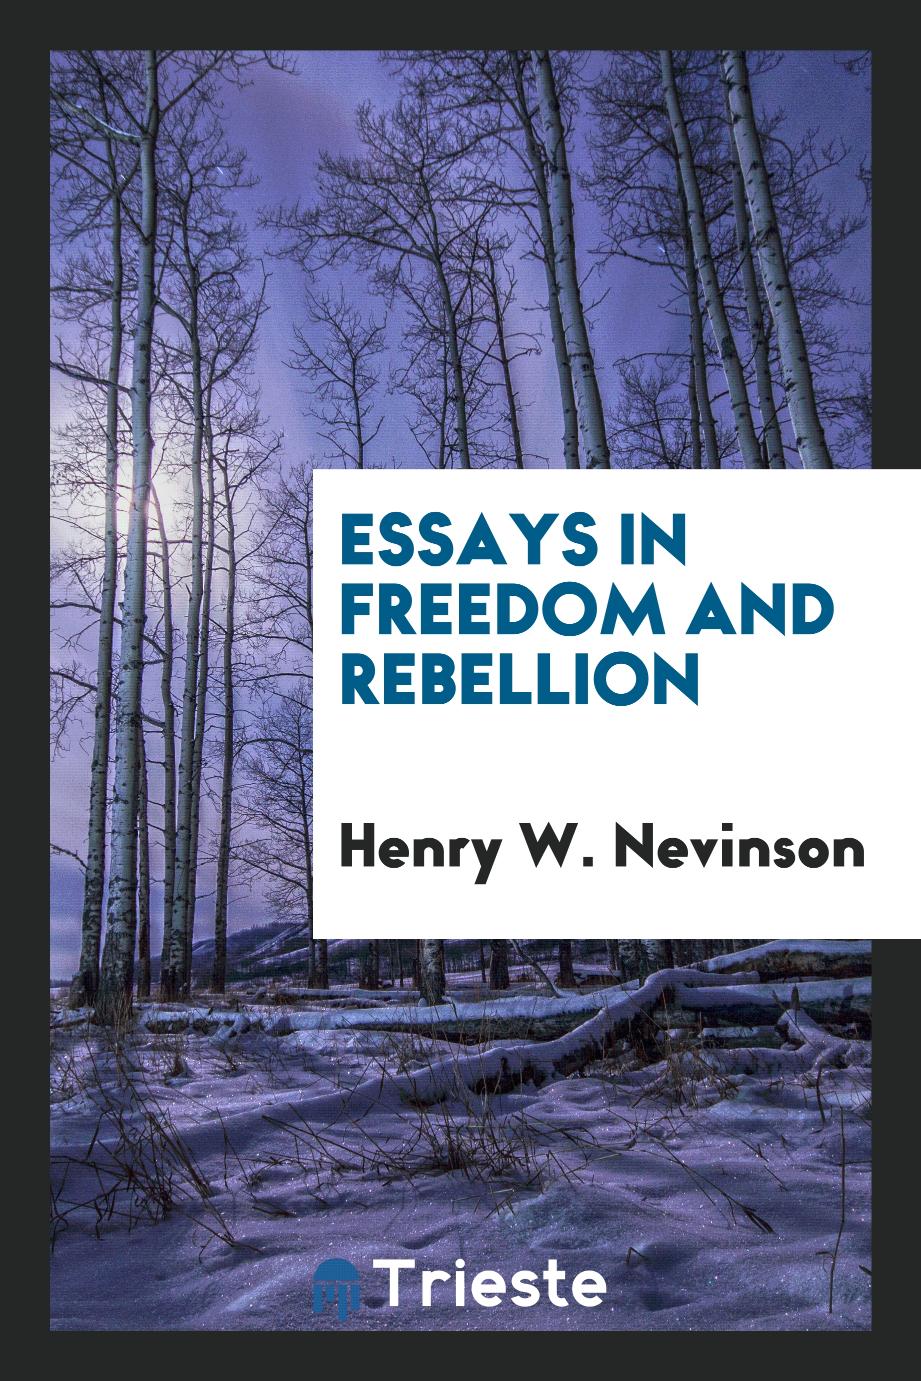 Henry W. Nevinson - Essays in Freedom and Rebellion